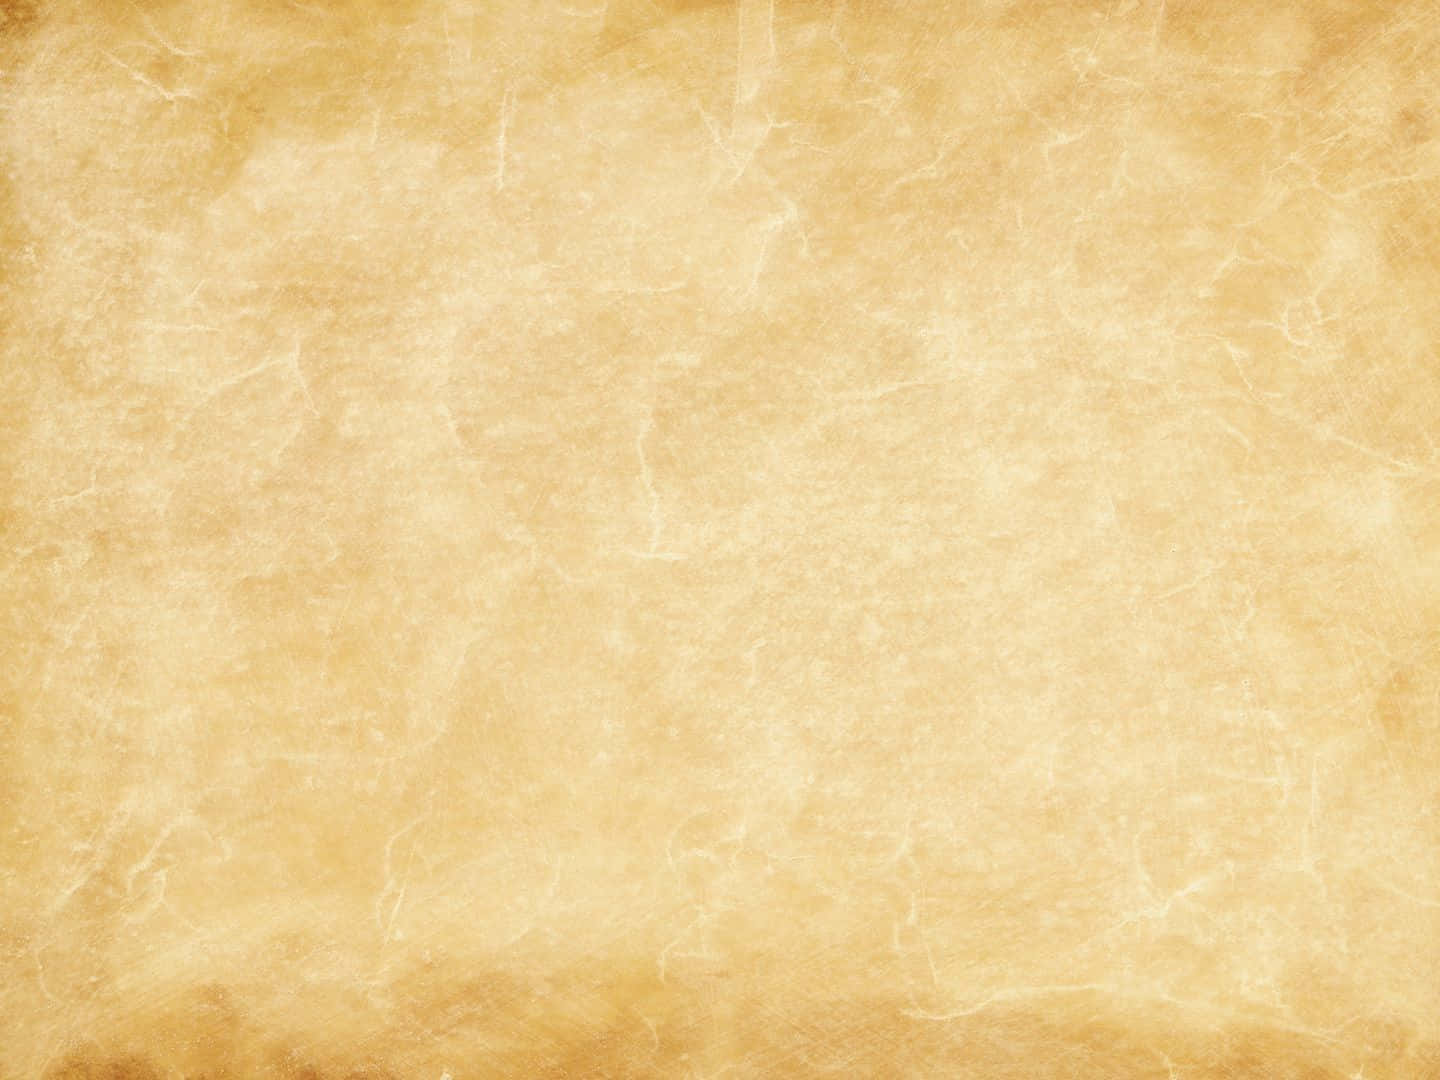 Parchment Background With Sprawling Creases